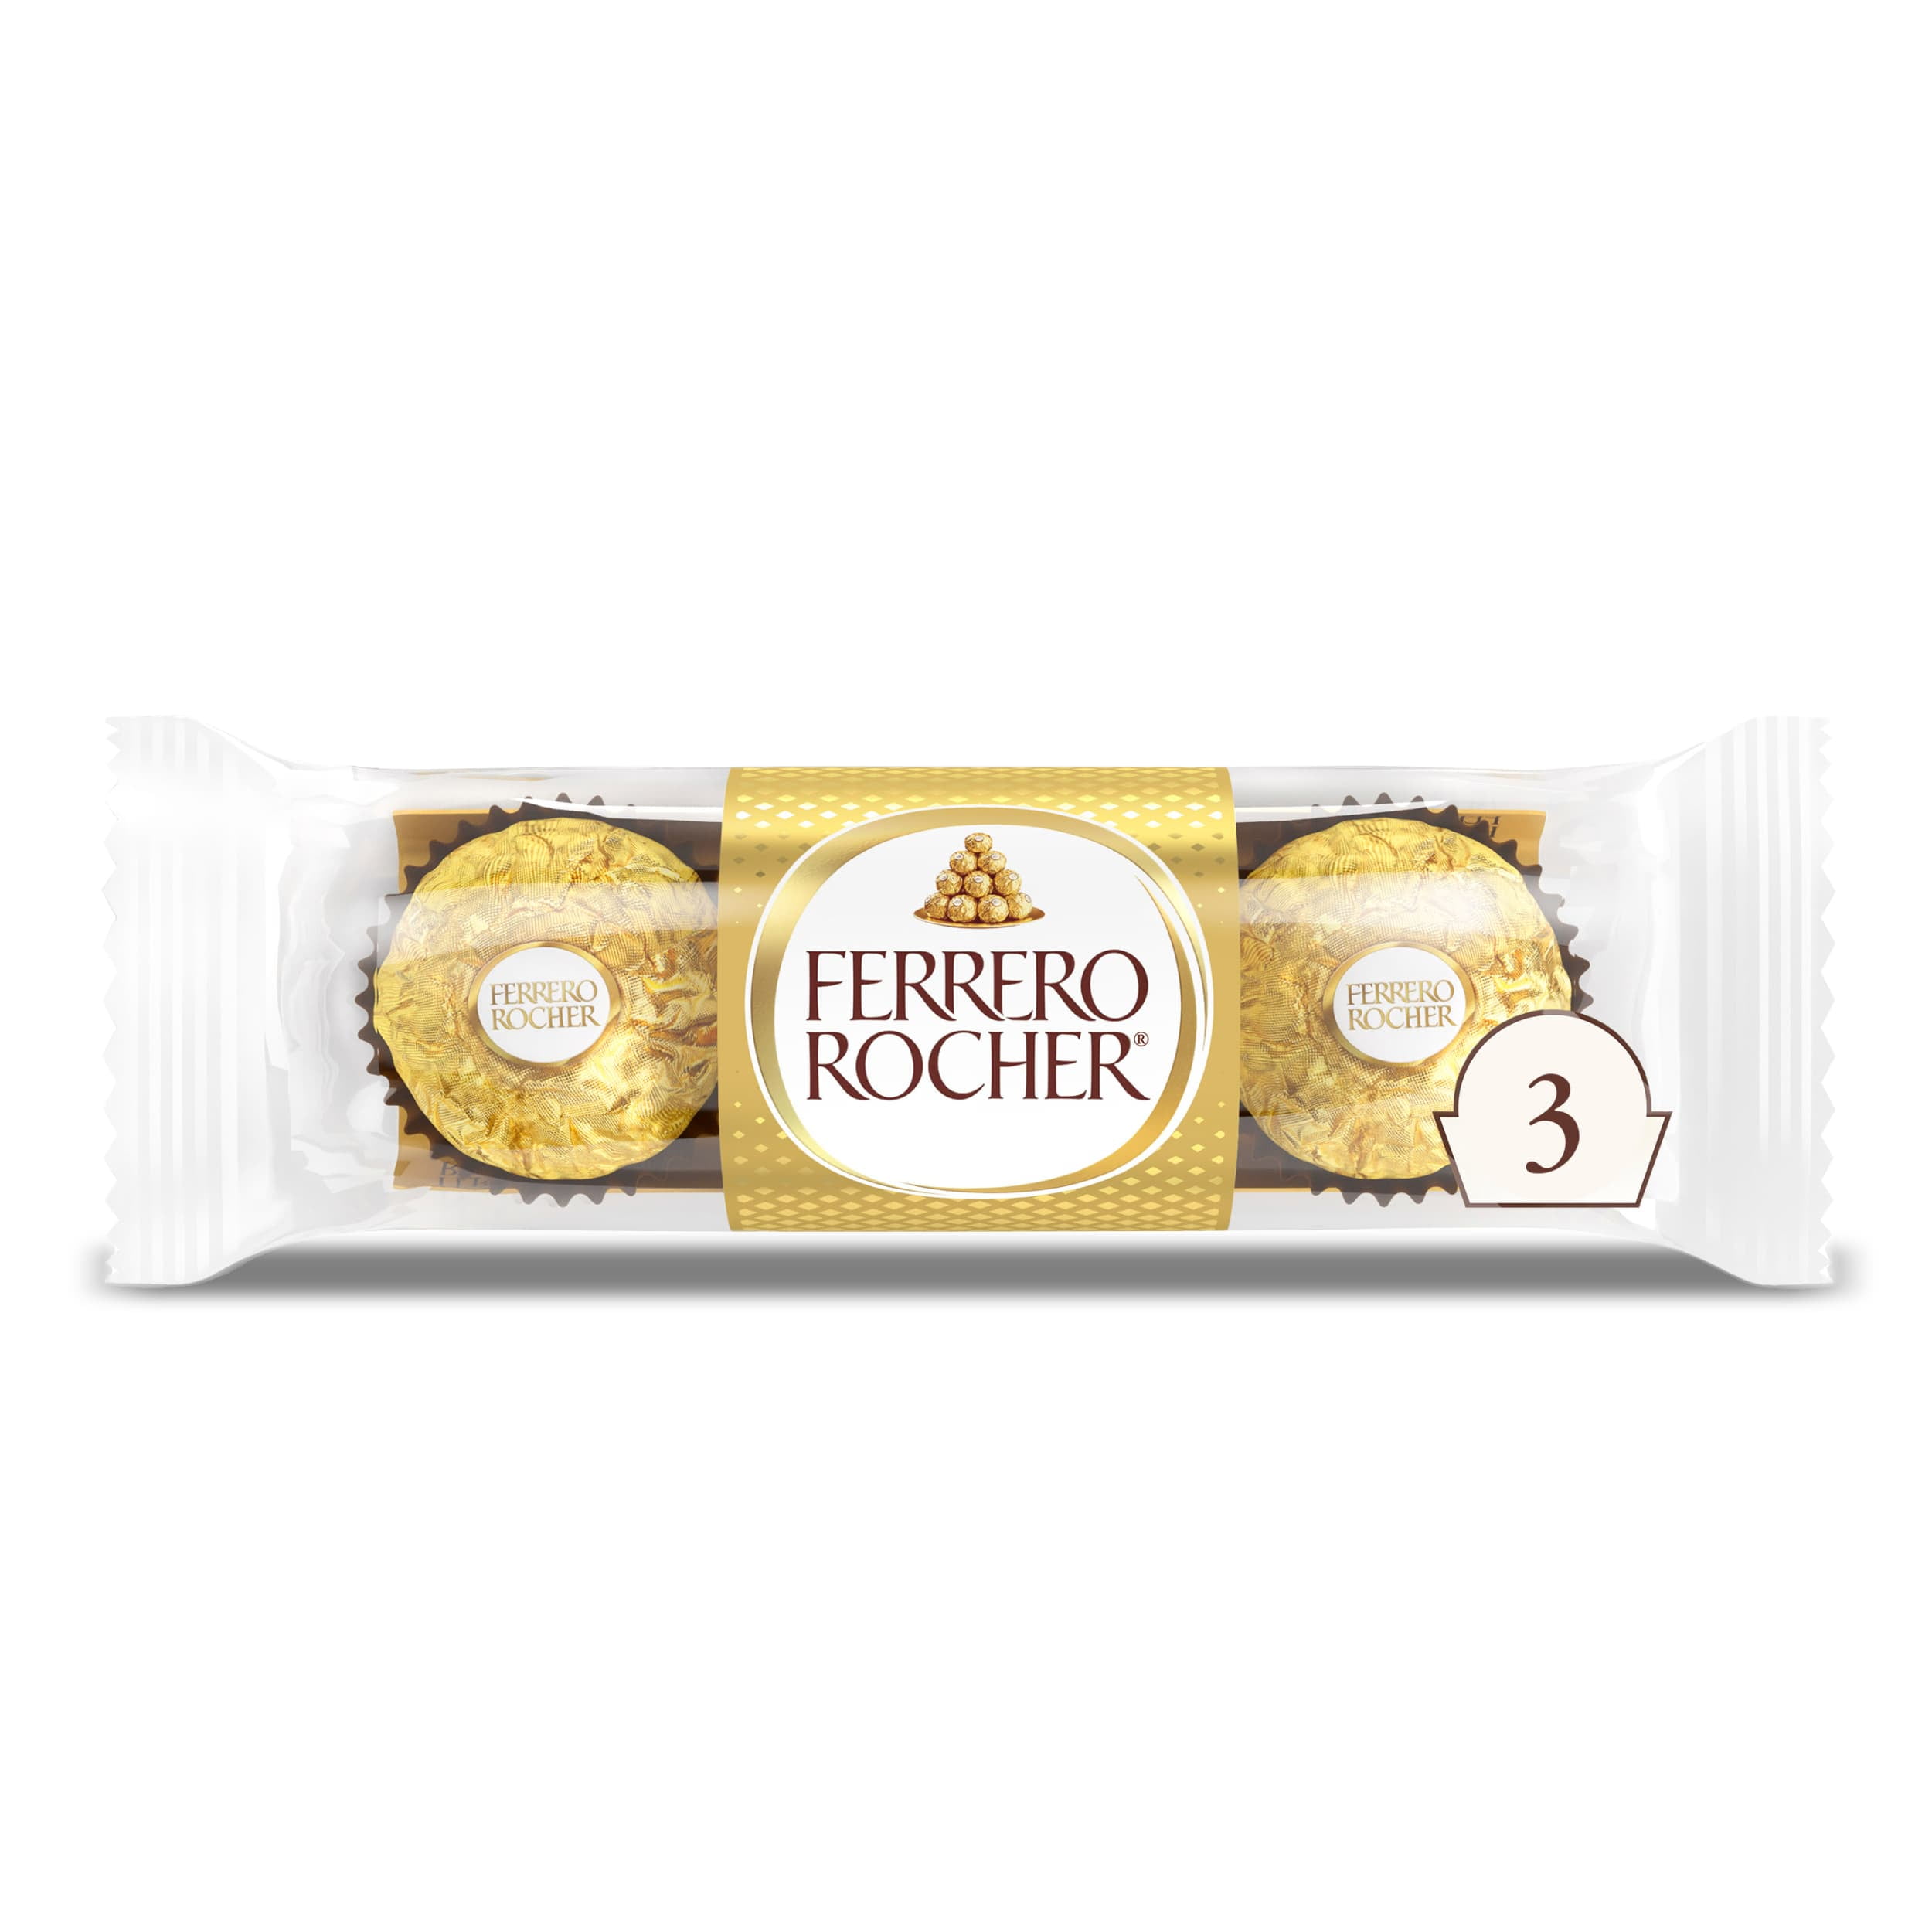 3 Count, Ferrero Rocher Premium Gourmet Milk Chocolate Hazelnut, Individually Wrapped Candy for Gifting, 1.3 oz